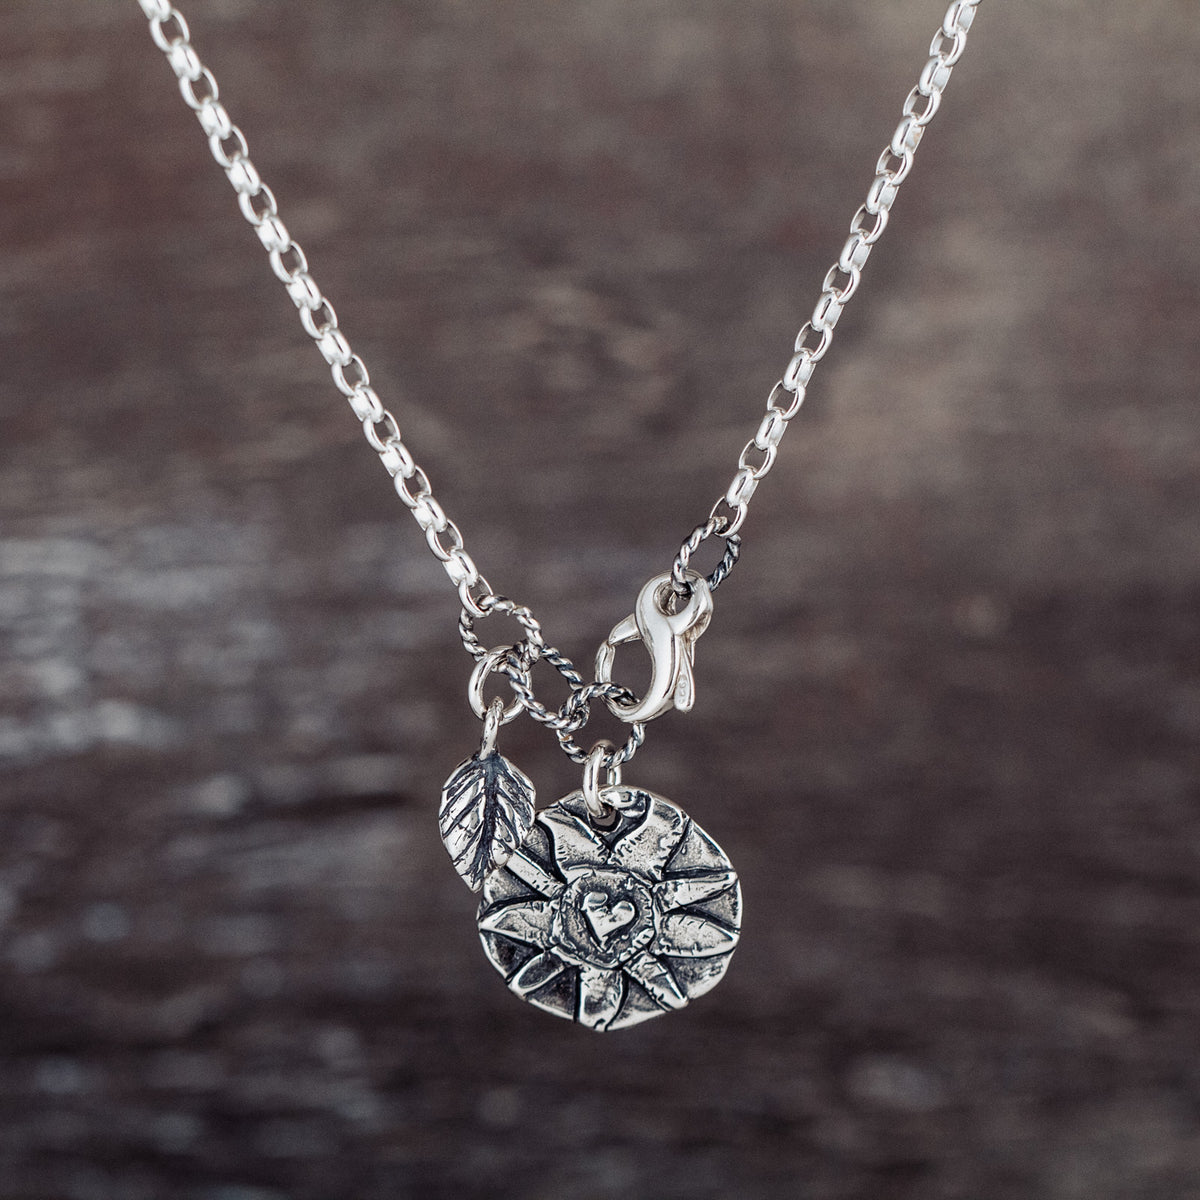 silver necklace with sunshine pendant